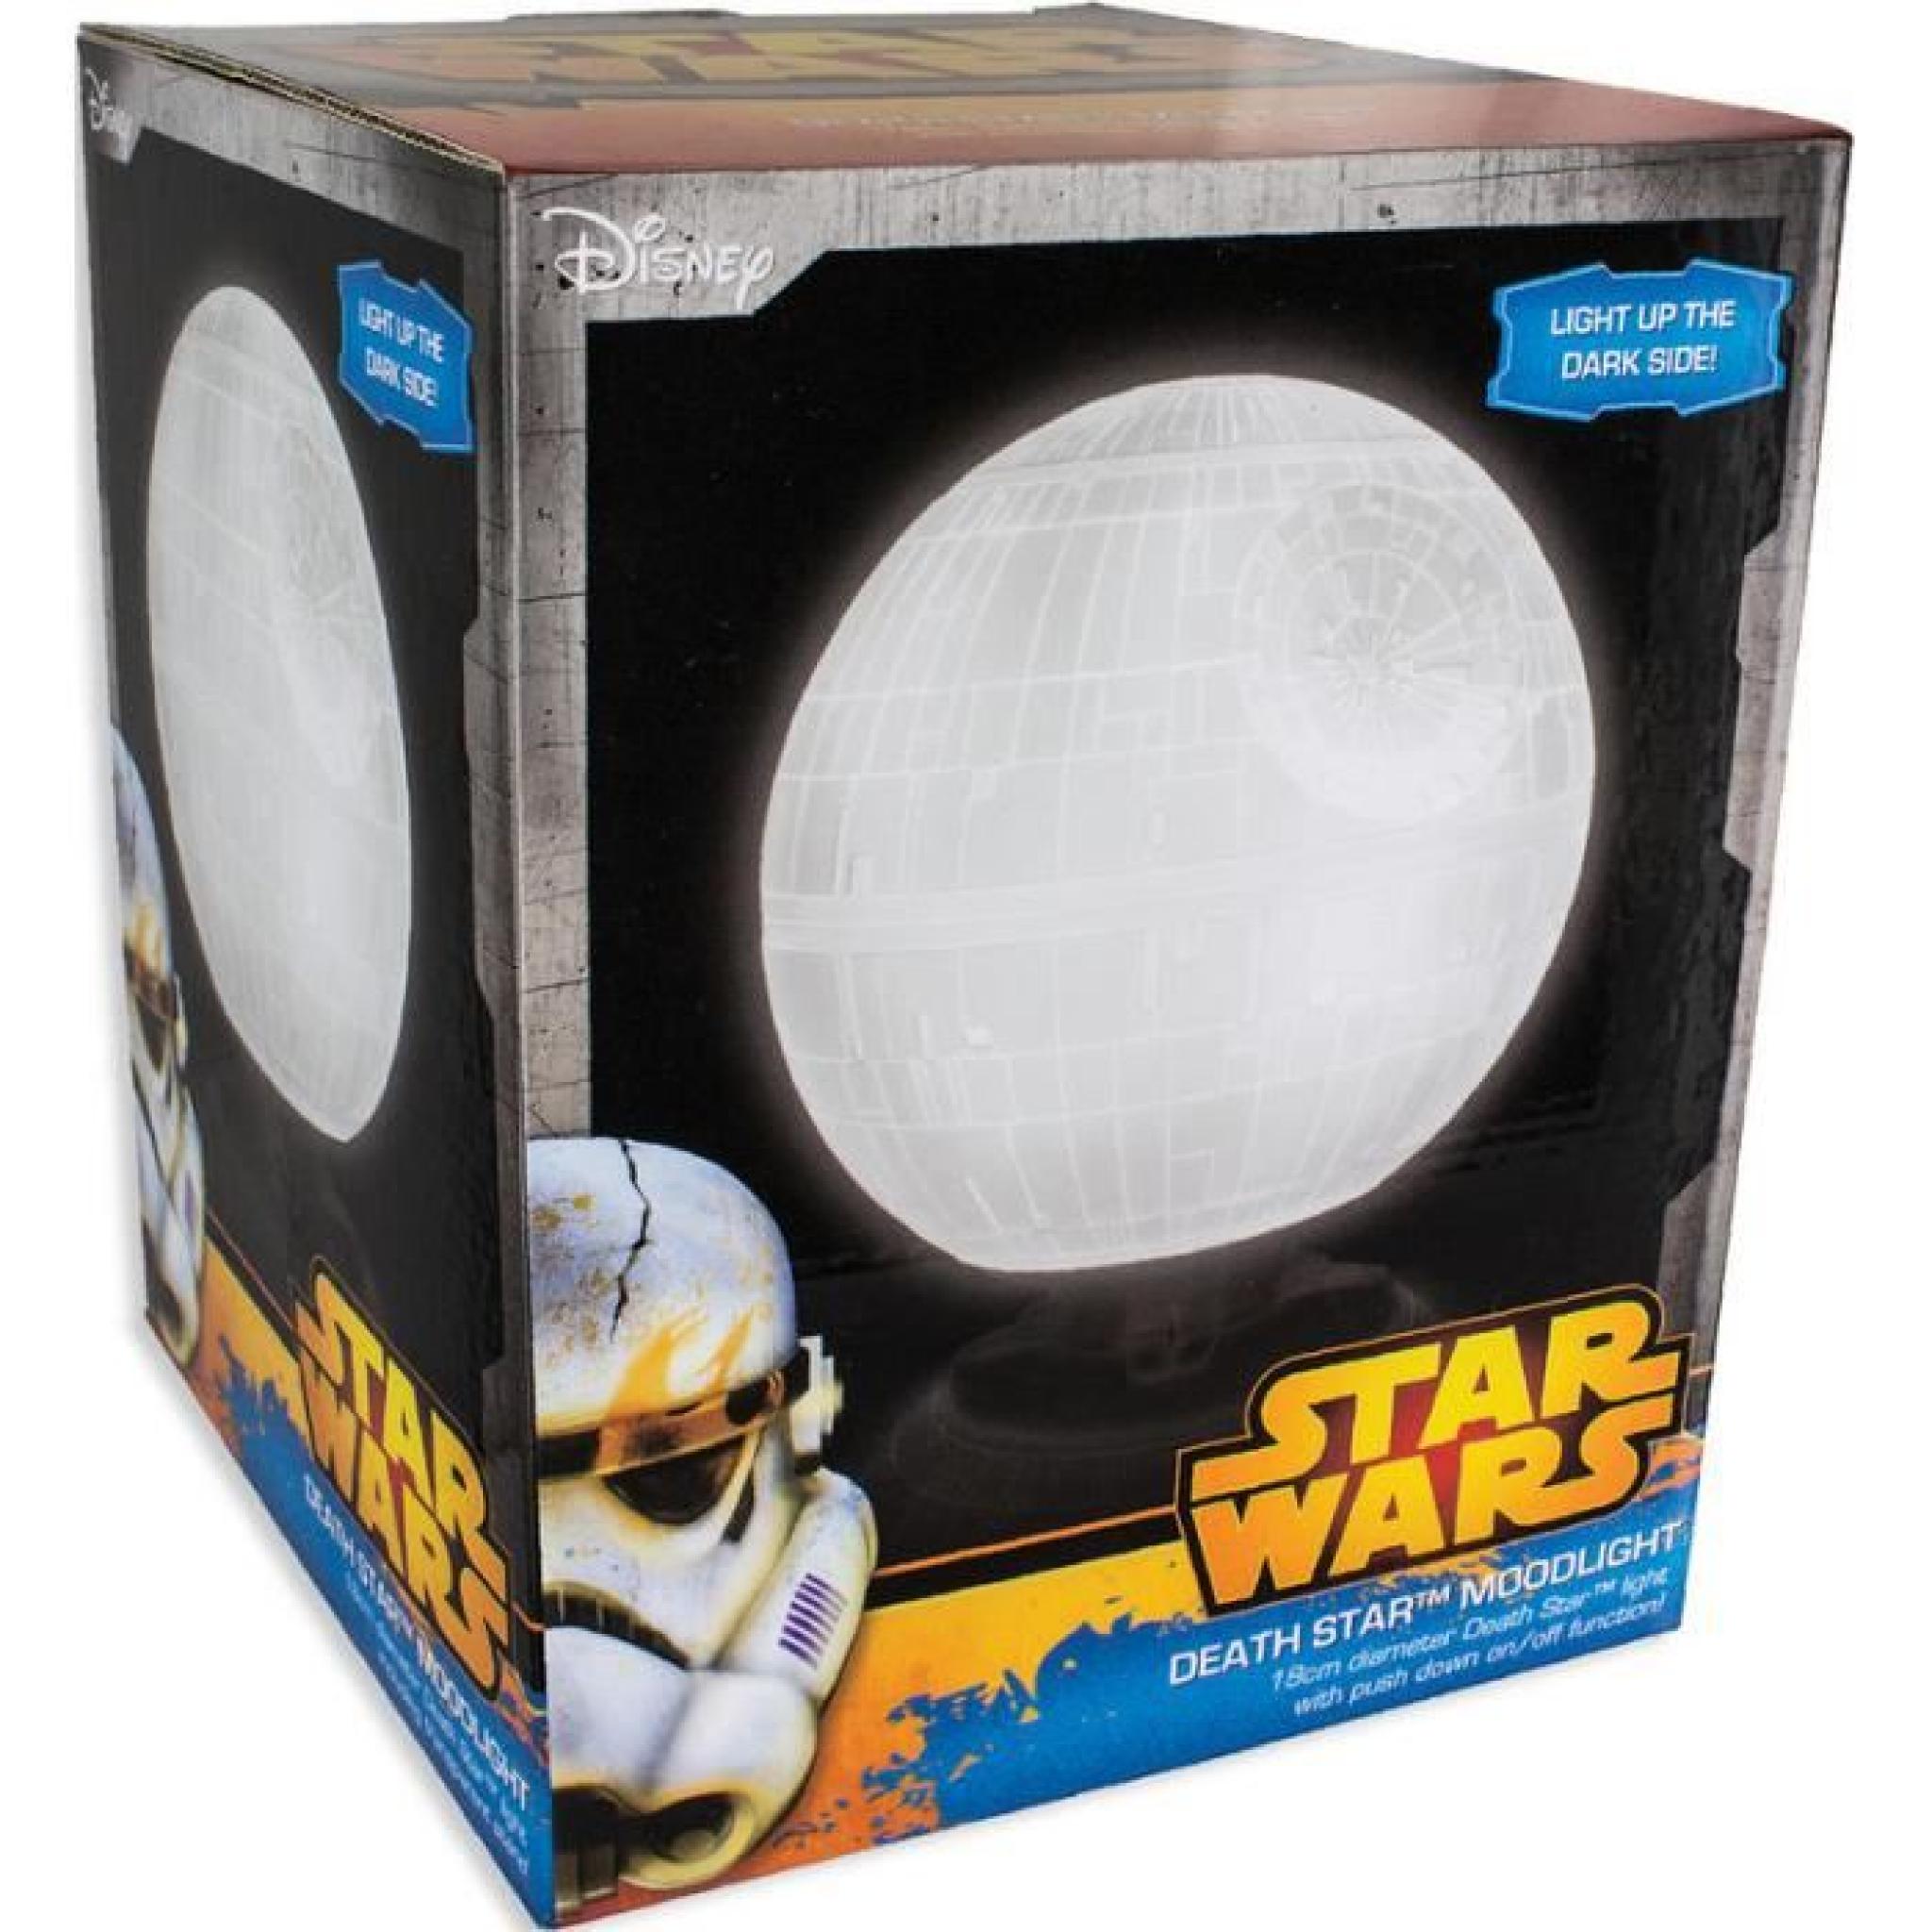 Lampe d'ambiance Star Wars pas cher